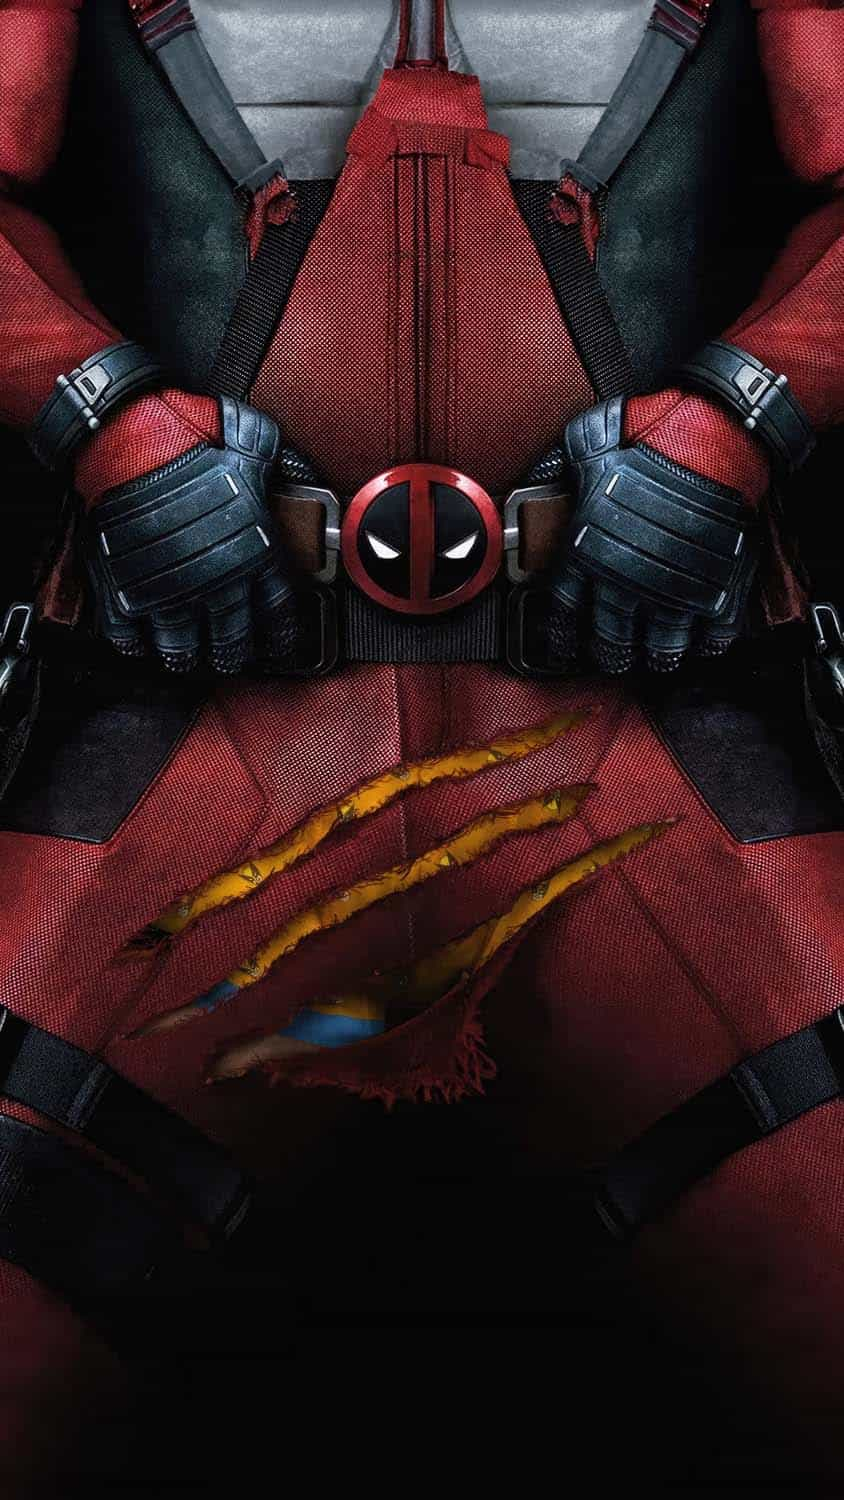 Deadpool Buckling up for Chaos iPhone Wallpaper 4K  iPhone Wallpapers